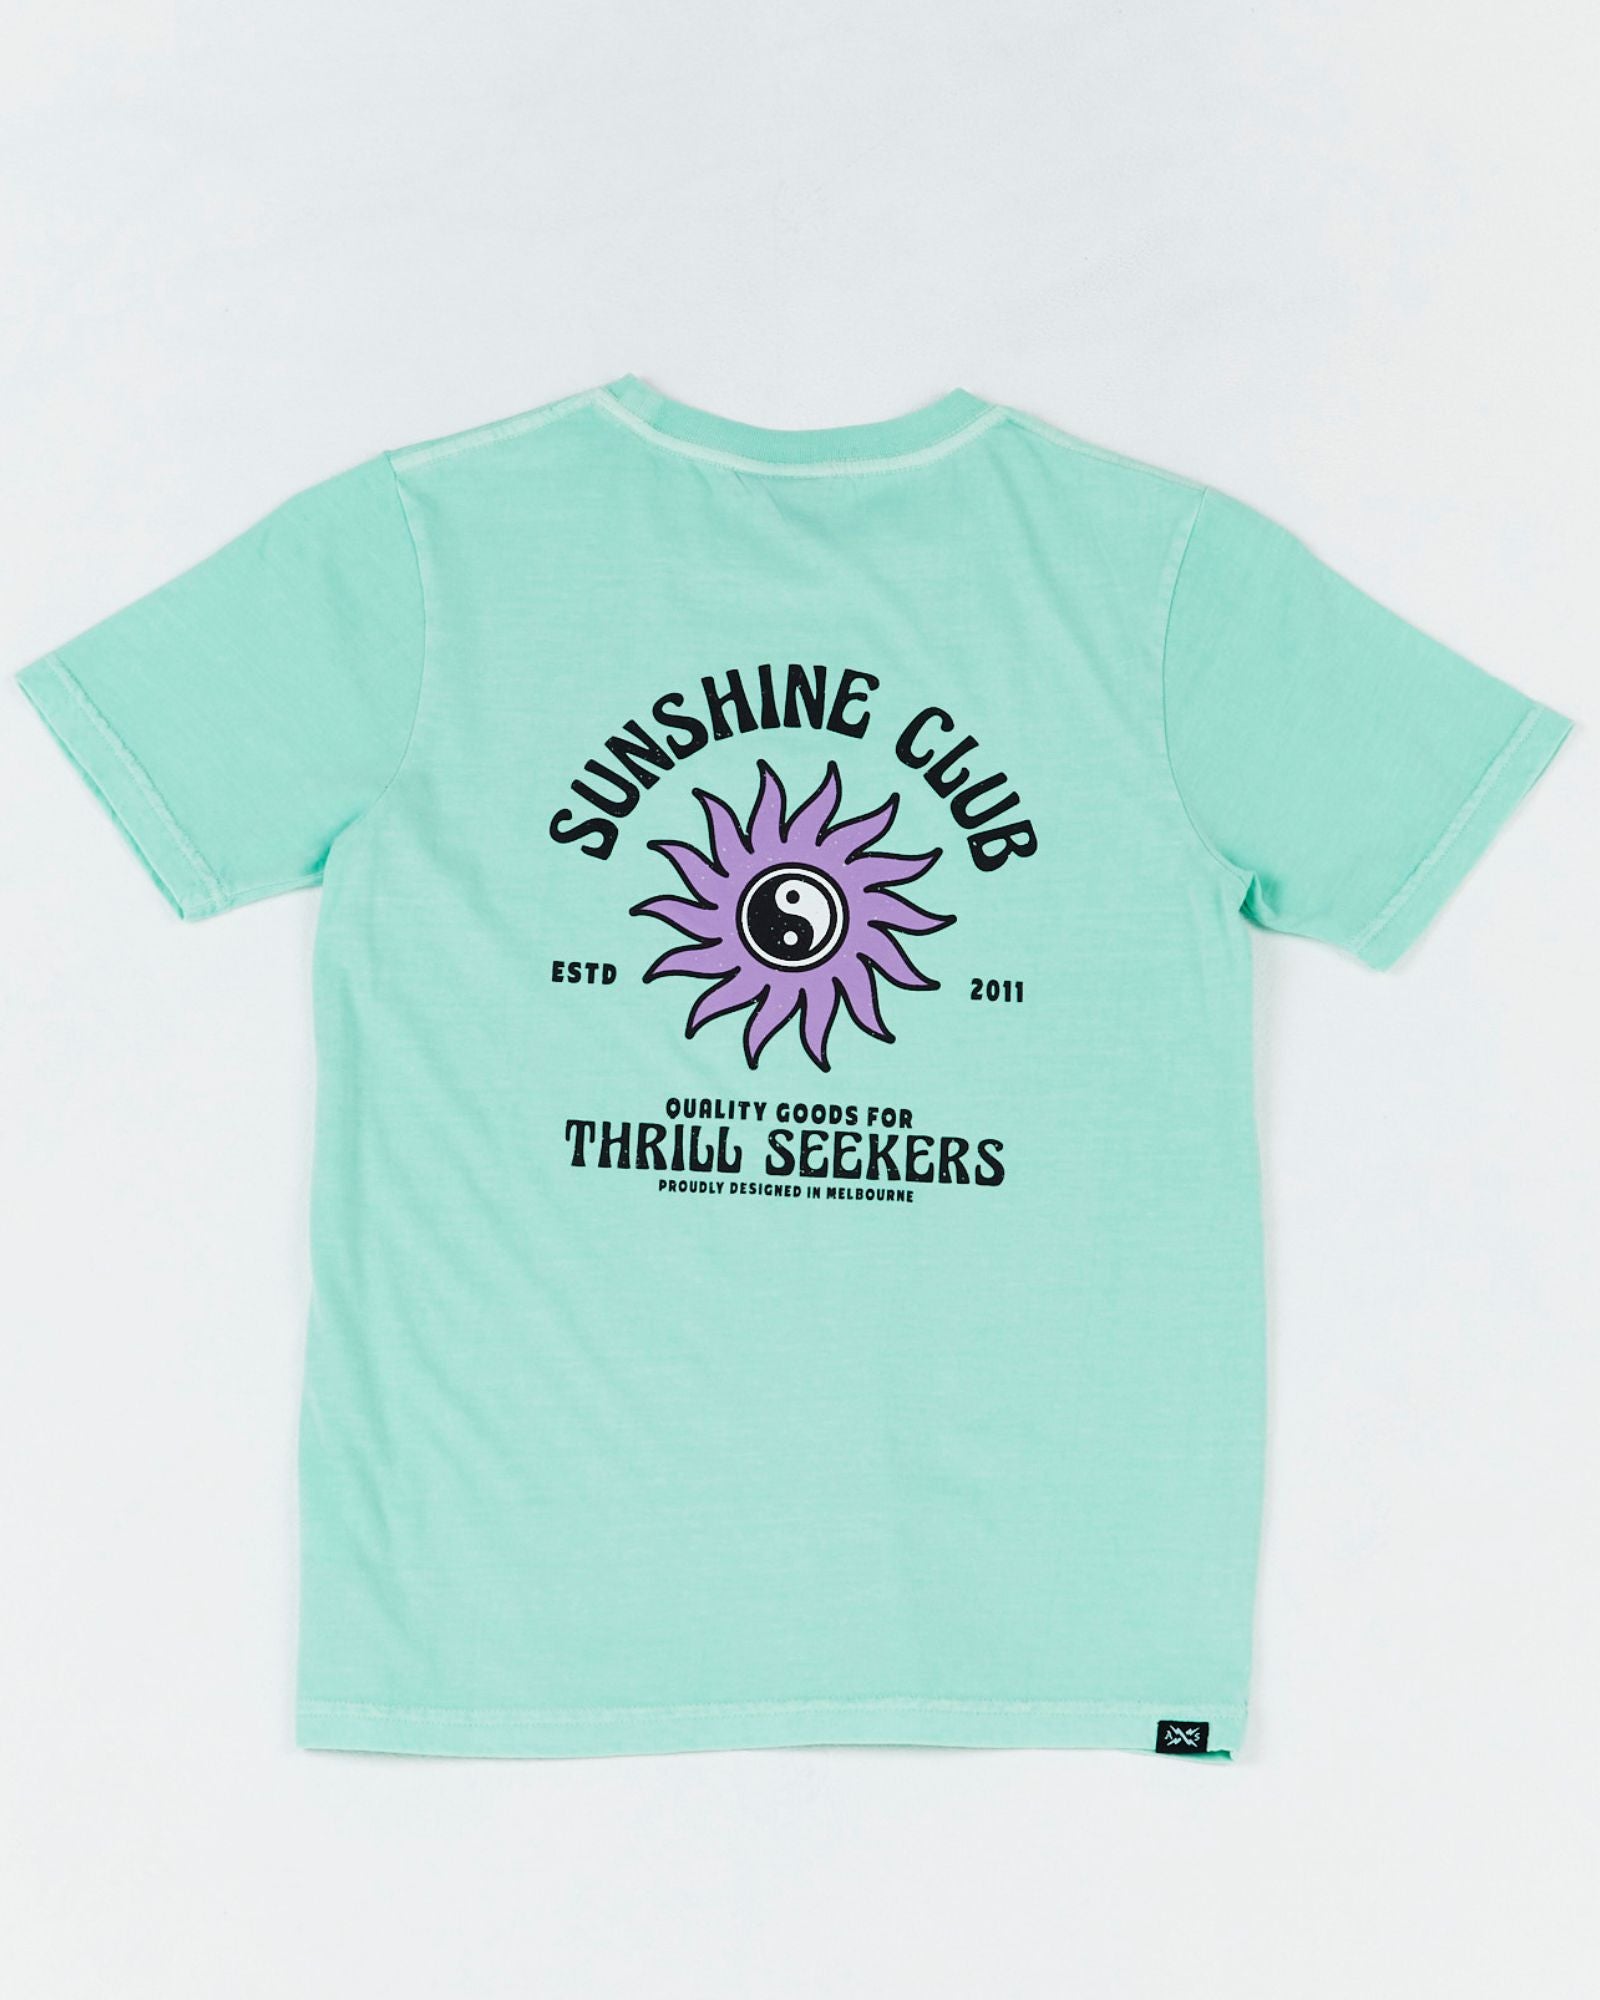 Teen Sunshine Club Tee by Alphabet Soup in mint green colourway for boys aged 8-16. Featuring 100% cotton, short sleeves, regular fit, “Sunshine Club” prints to chest and back.